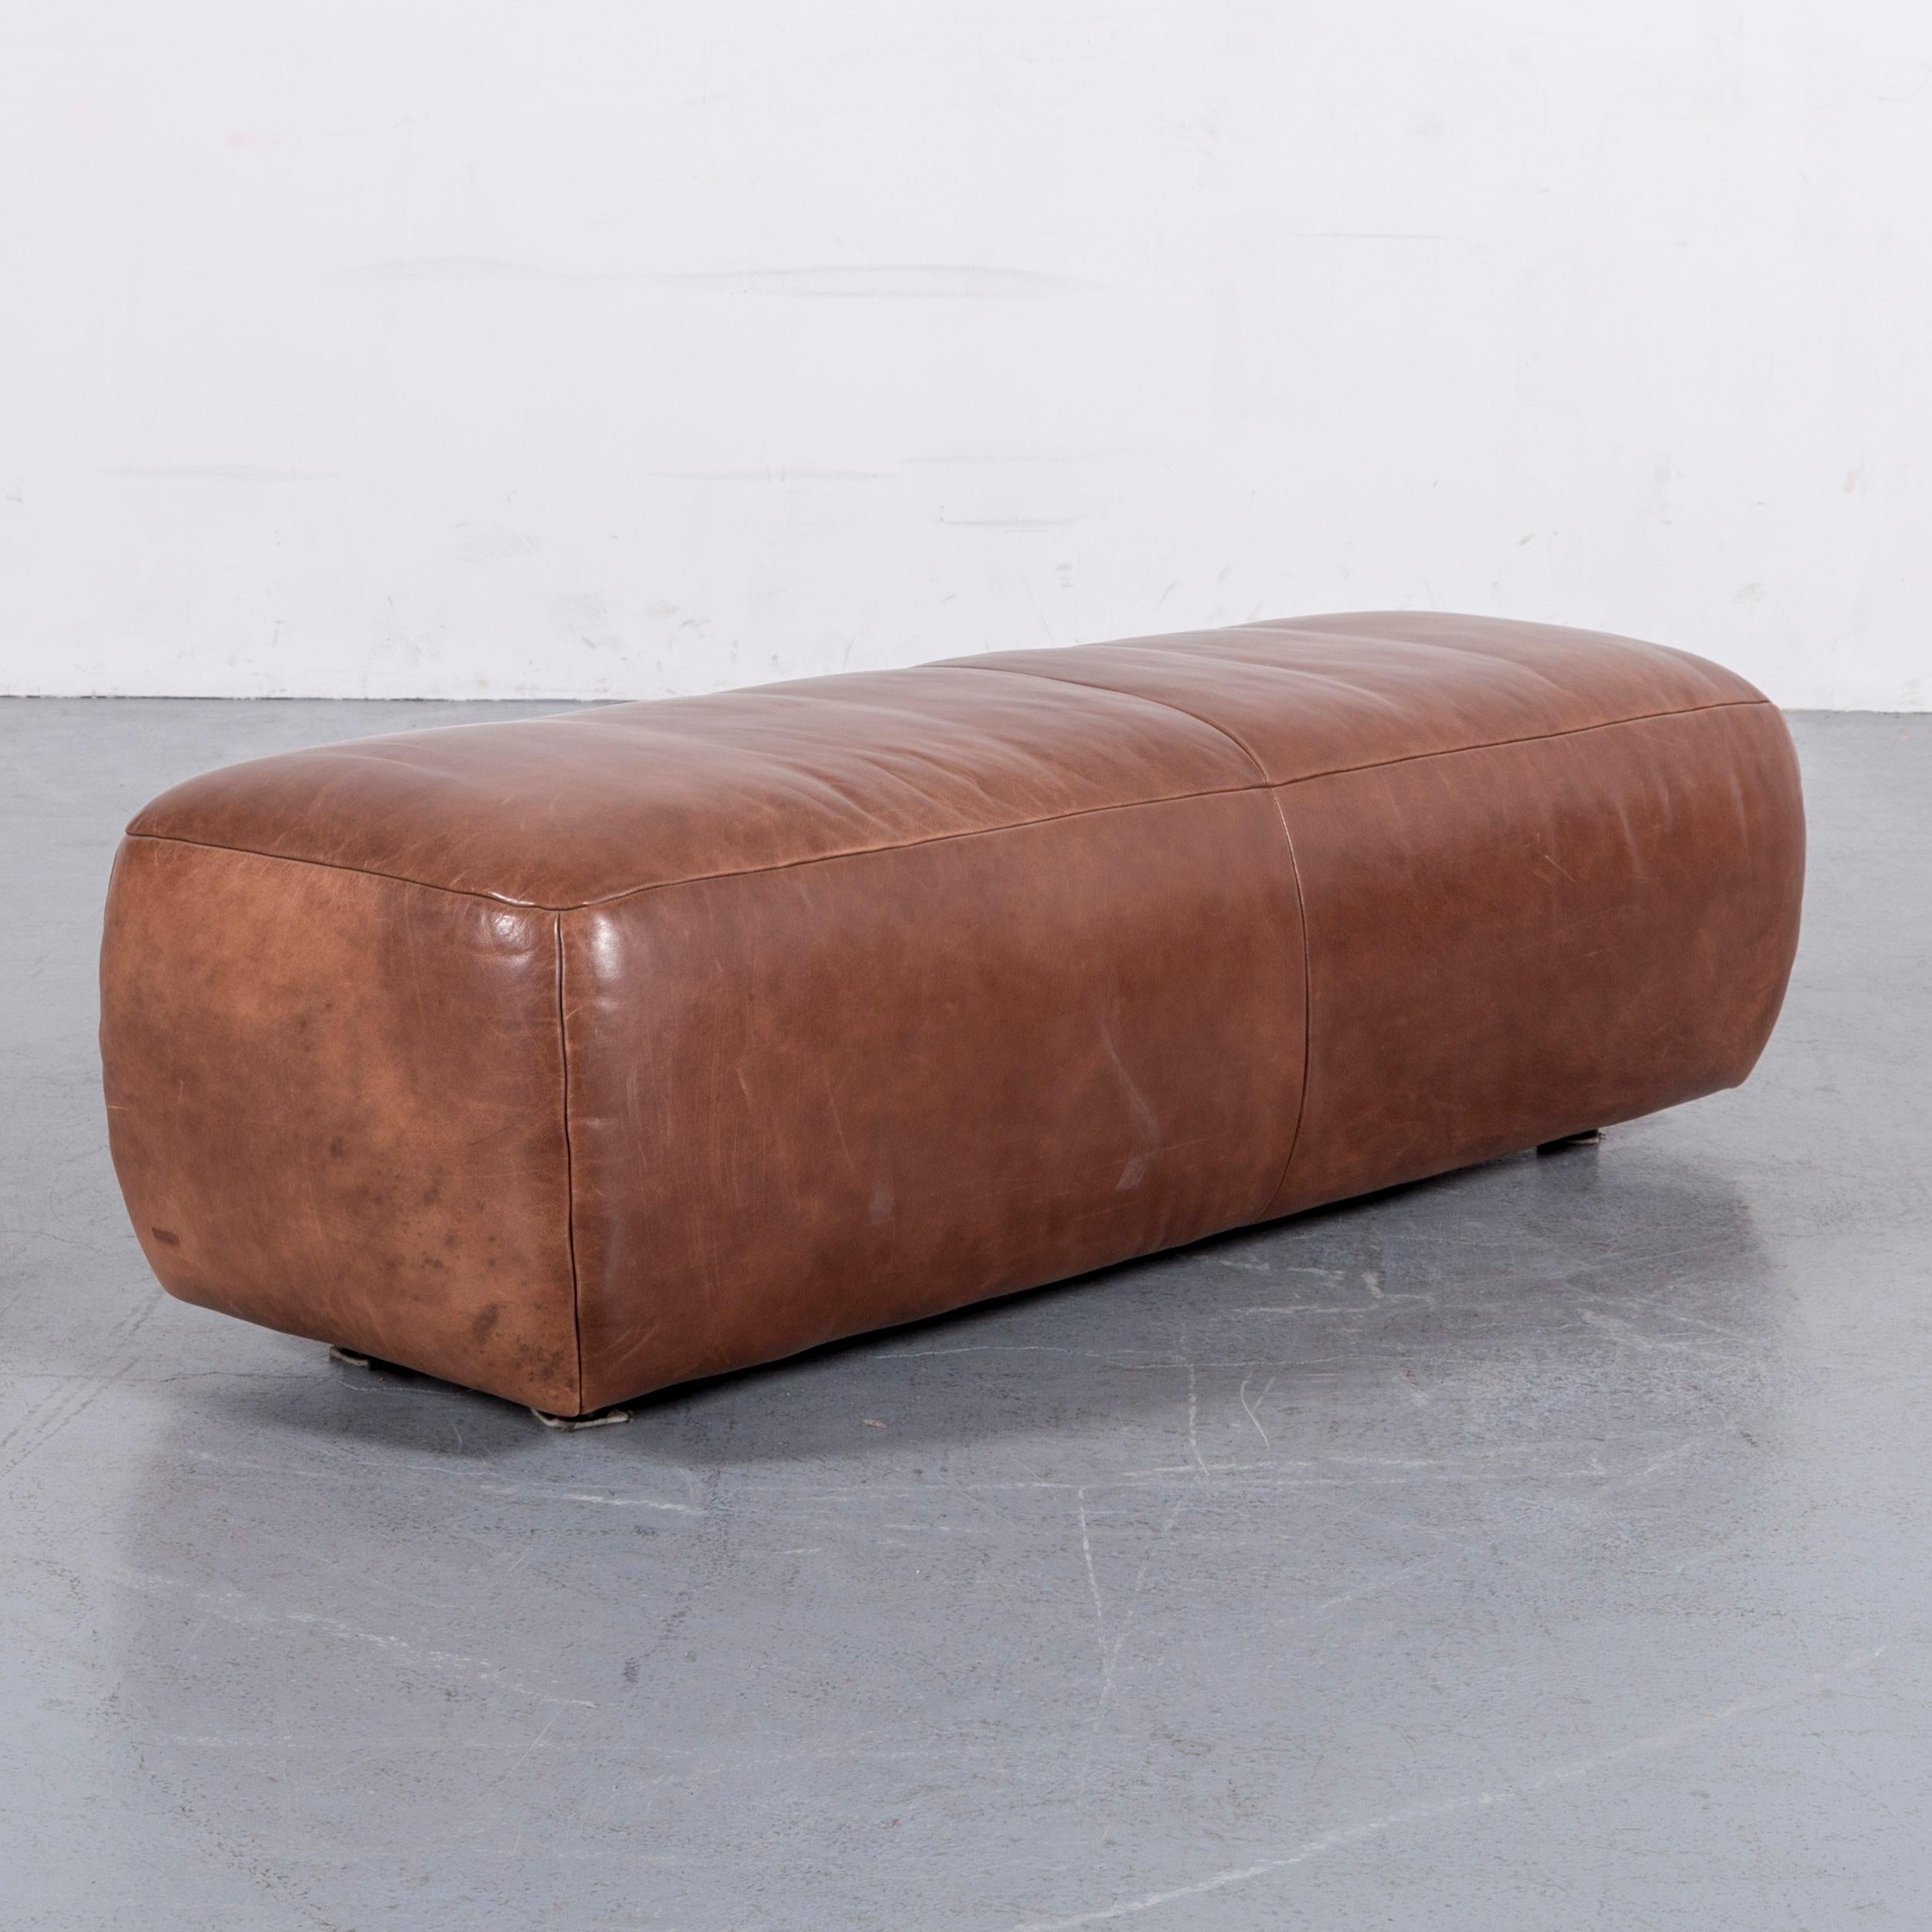 We bring to you an Koinor Alexa Leather Foot-Stool Brown Bench.
































